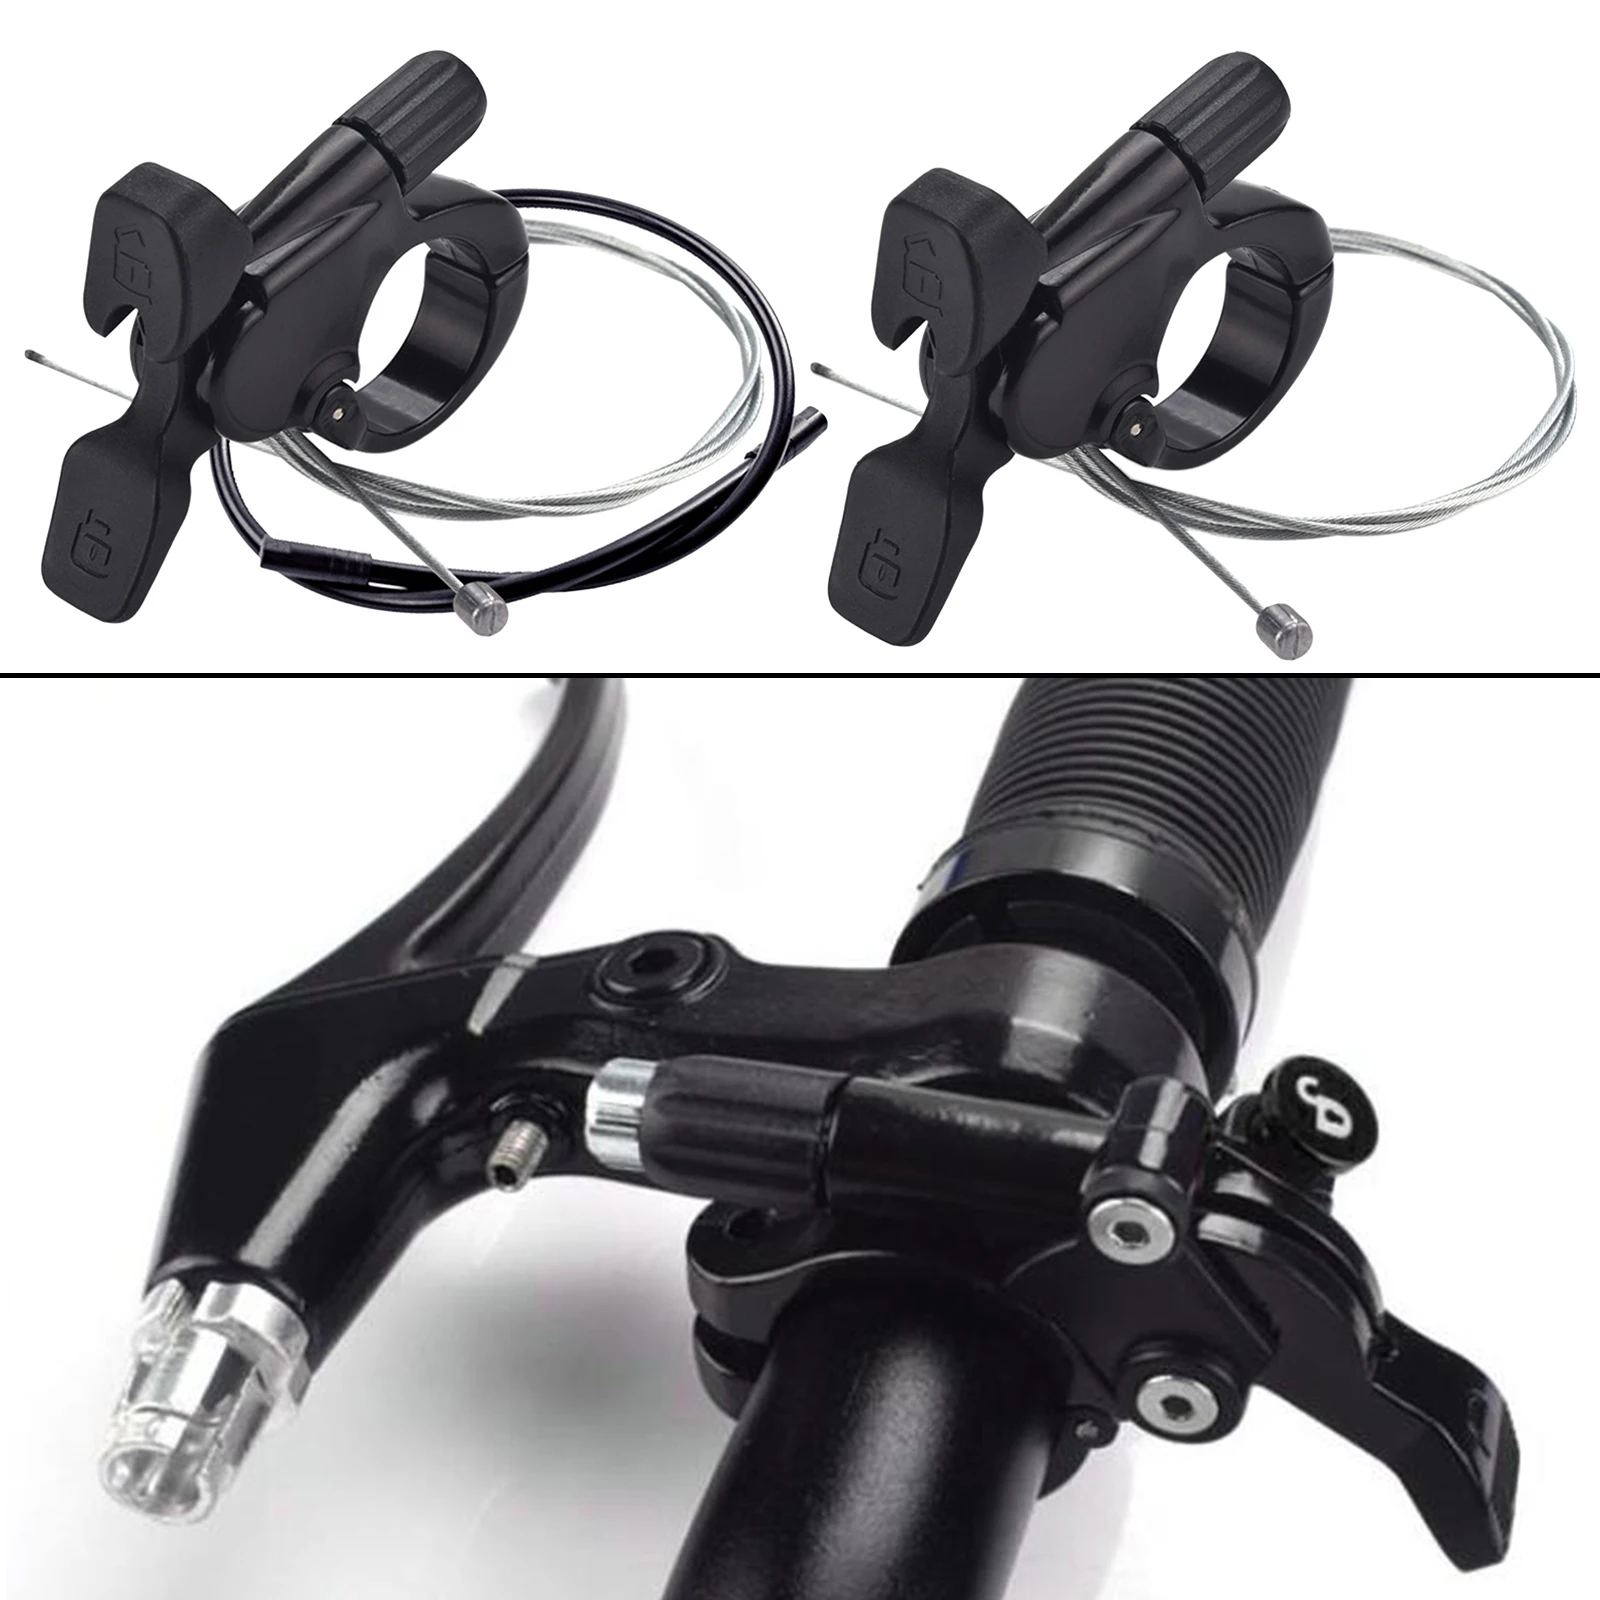 Adjust Bike Front Fork Remote Lockout Lever w/ Cable Aluminum Alloy Road Mountain Bicycle Parts Accessories